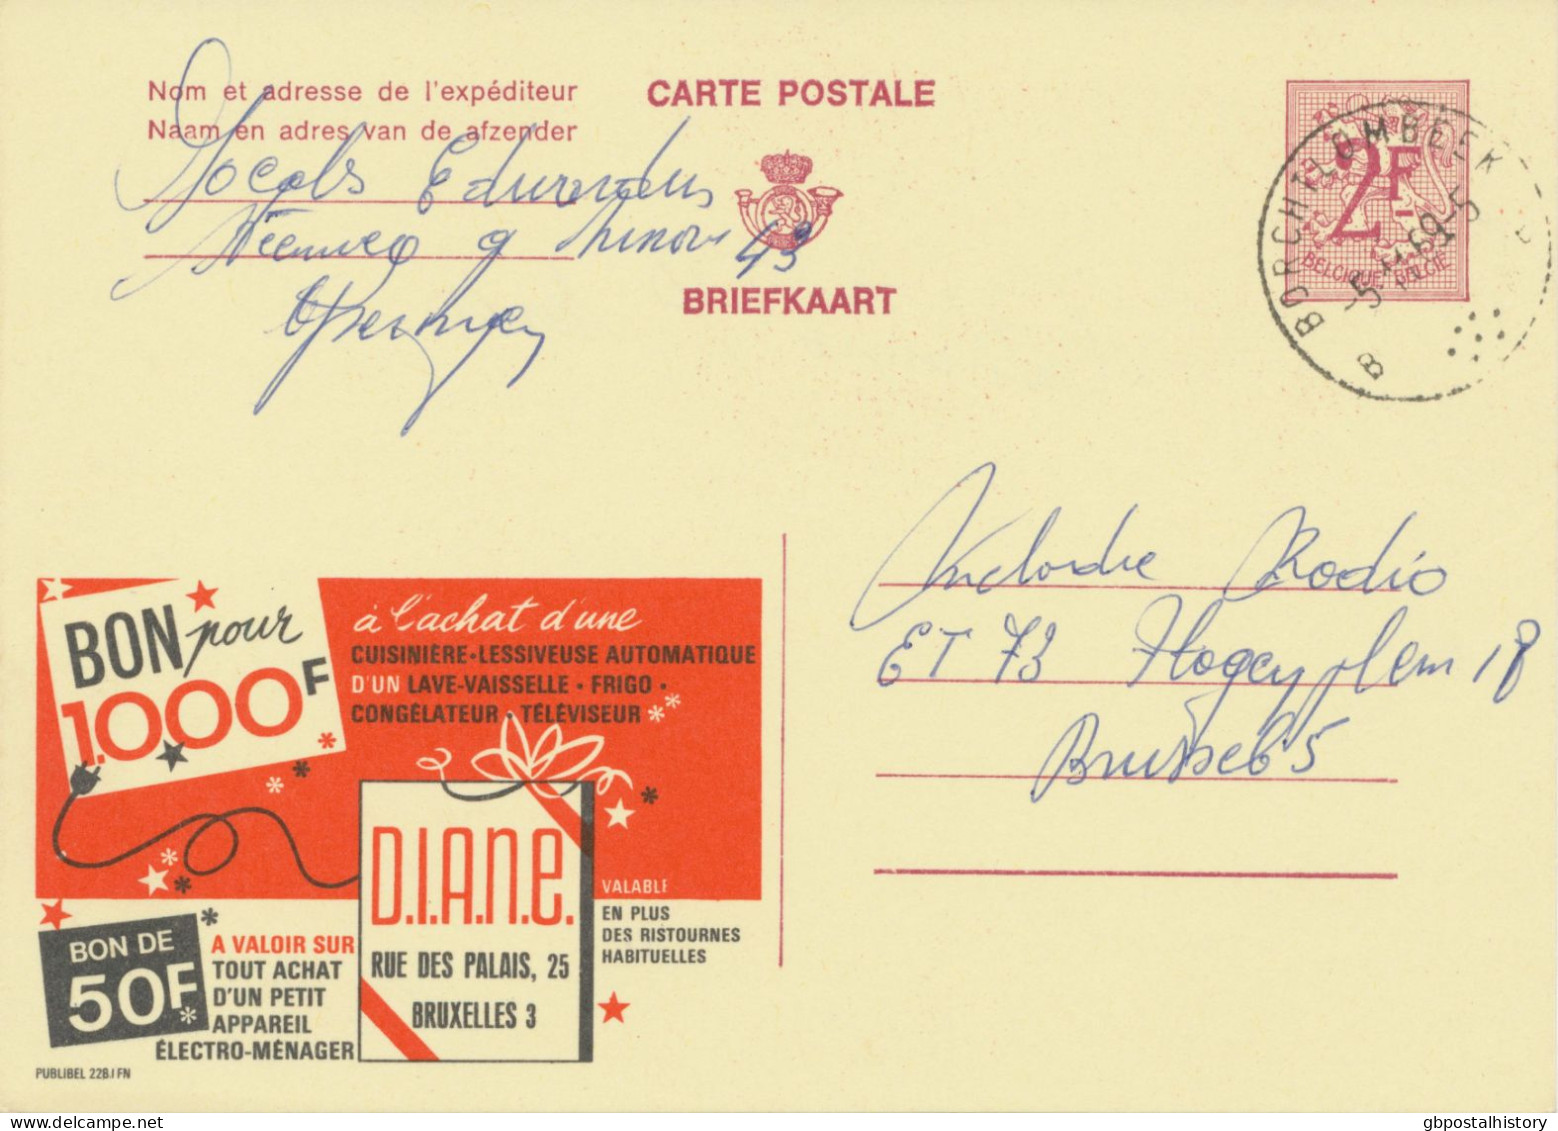 BELGIUM VILLAGE POSTMARKS  BORCHTLOMBEEK B (now Roosdaal) SC With Dots 1969 (Postal Stationery 2 F, PUBLIBEL 2281FN) - Oblitérations à Points